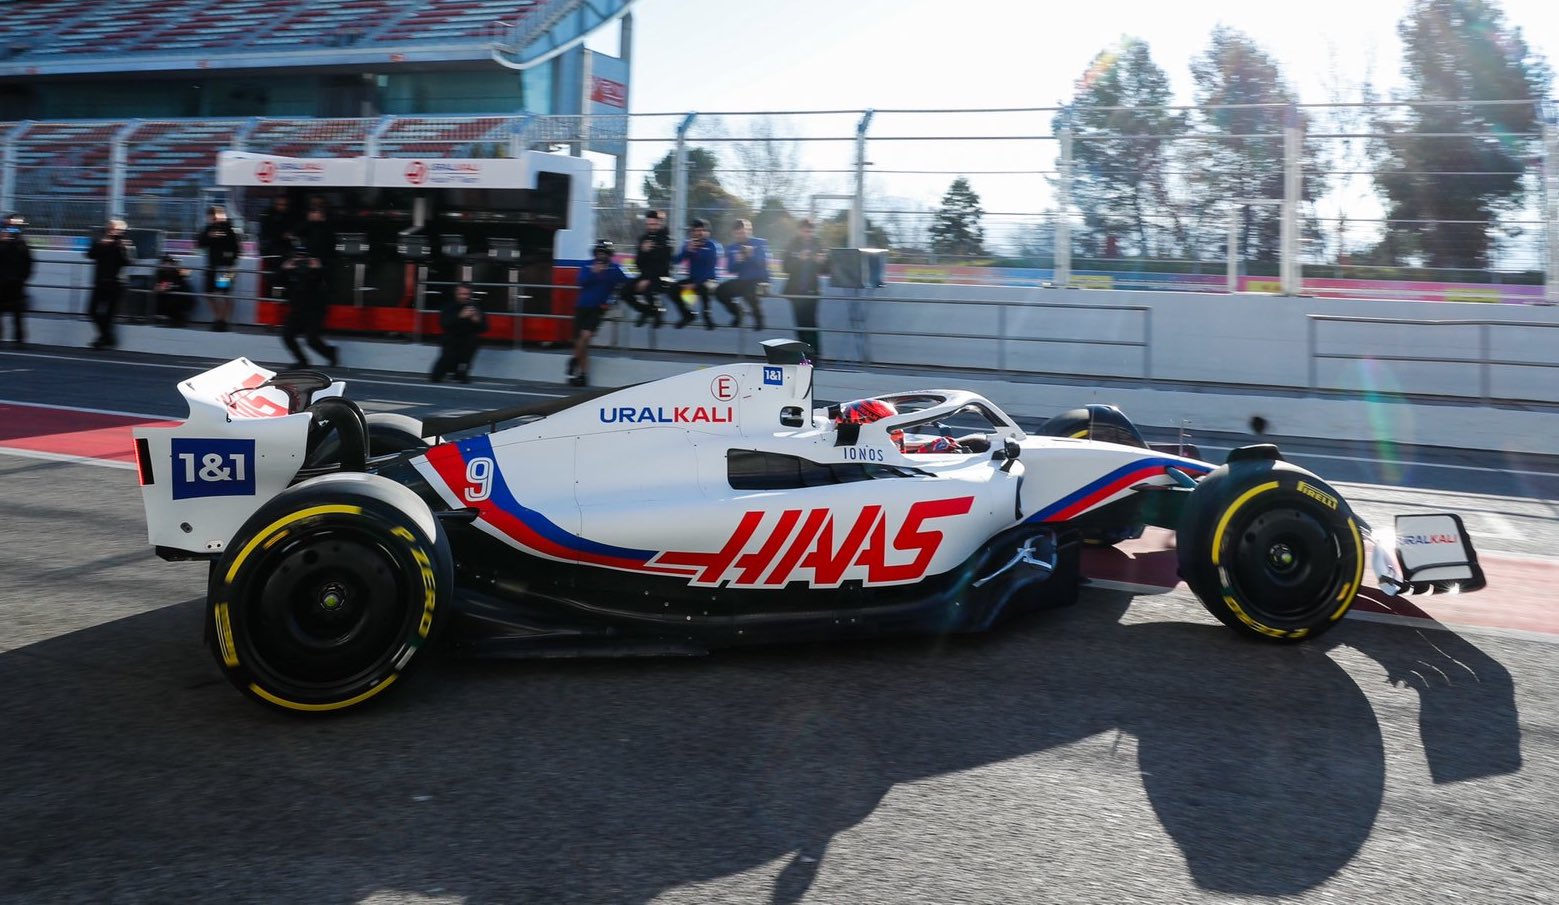 What You Need To Know About F1 Pre-Season Testing